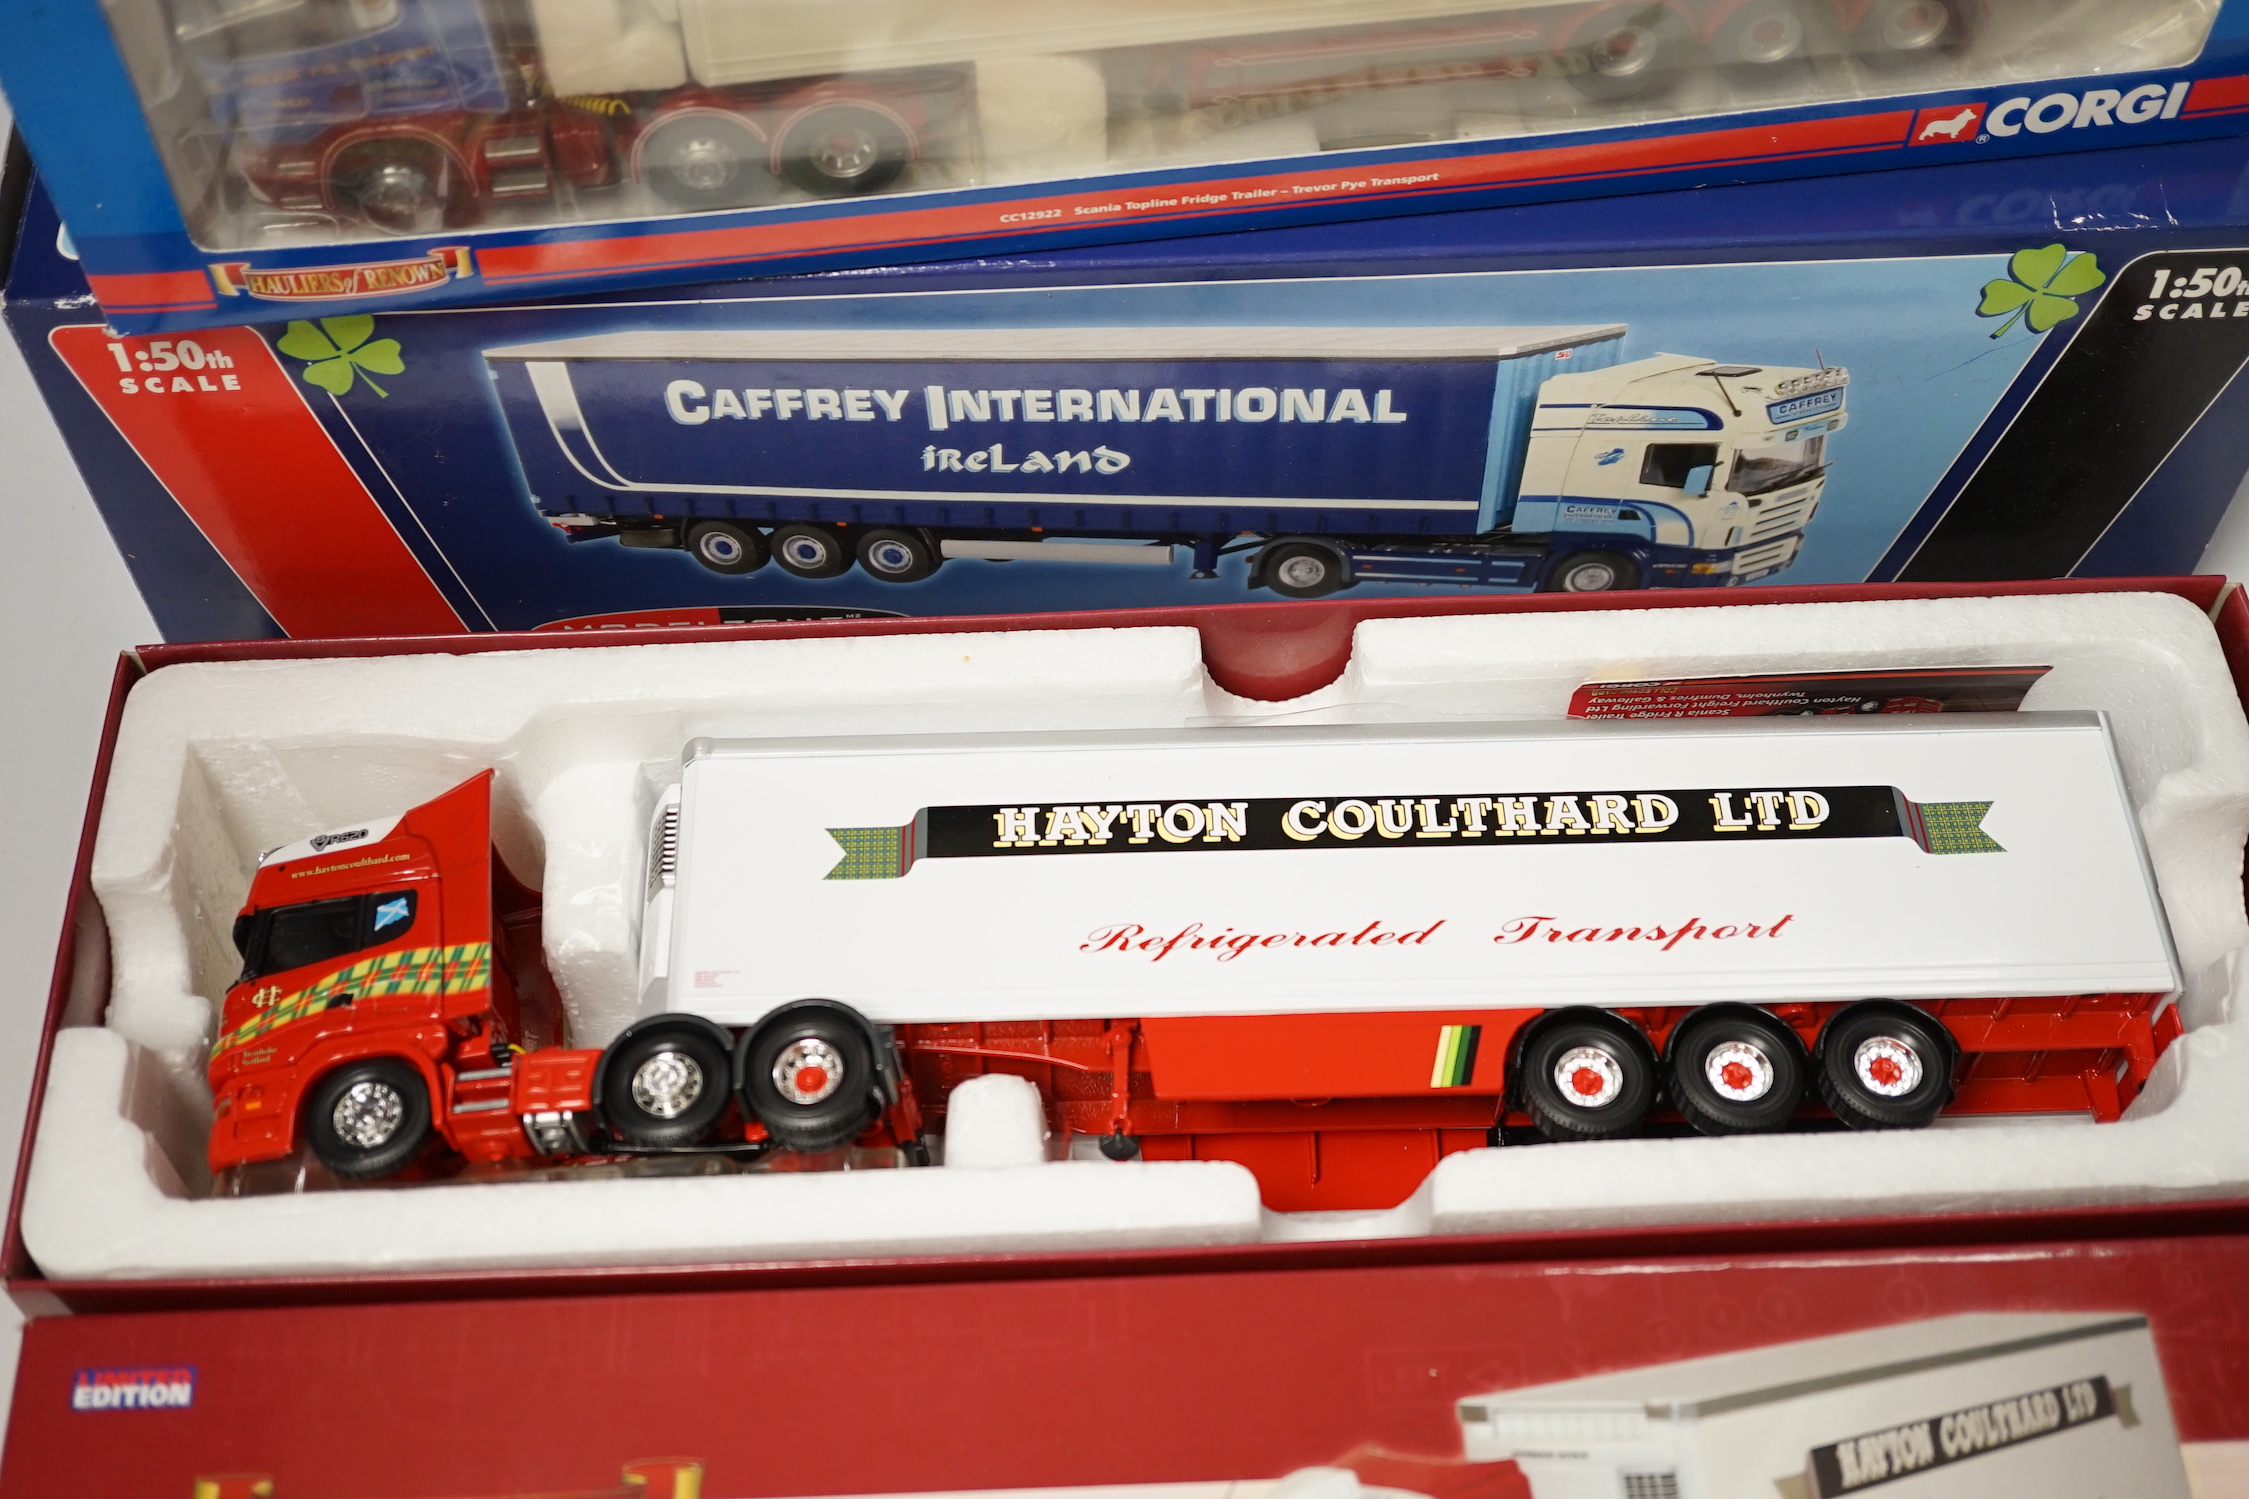 Four boxed Corgi and Universal Hobbies 1:50 scale articulated trucks; a Scania refrigerated lorry (CC13727), Scania Topline refrigerated lorry (CC12922), a Renault Premium Curtainside (75602), and another Scania Topline